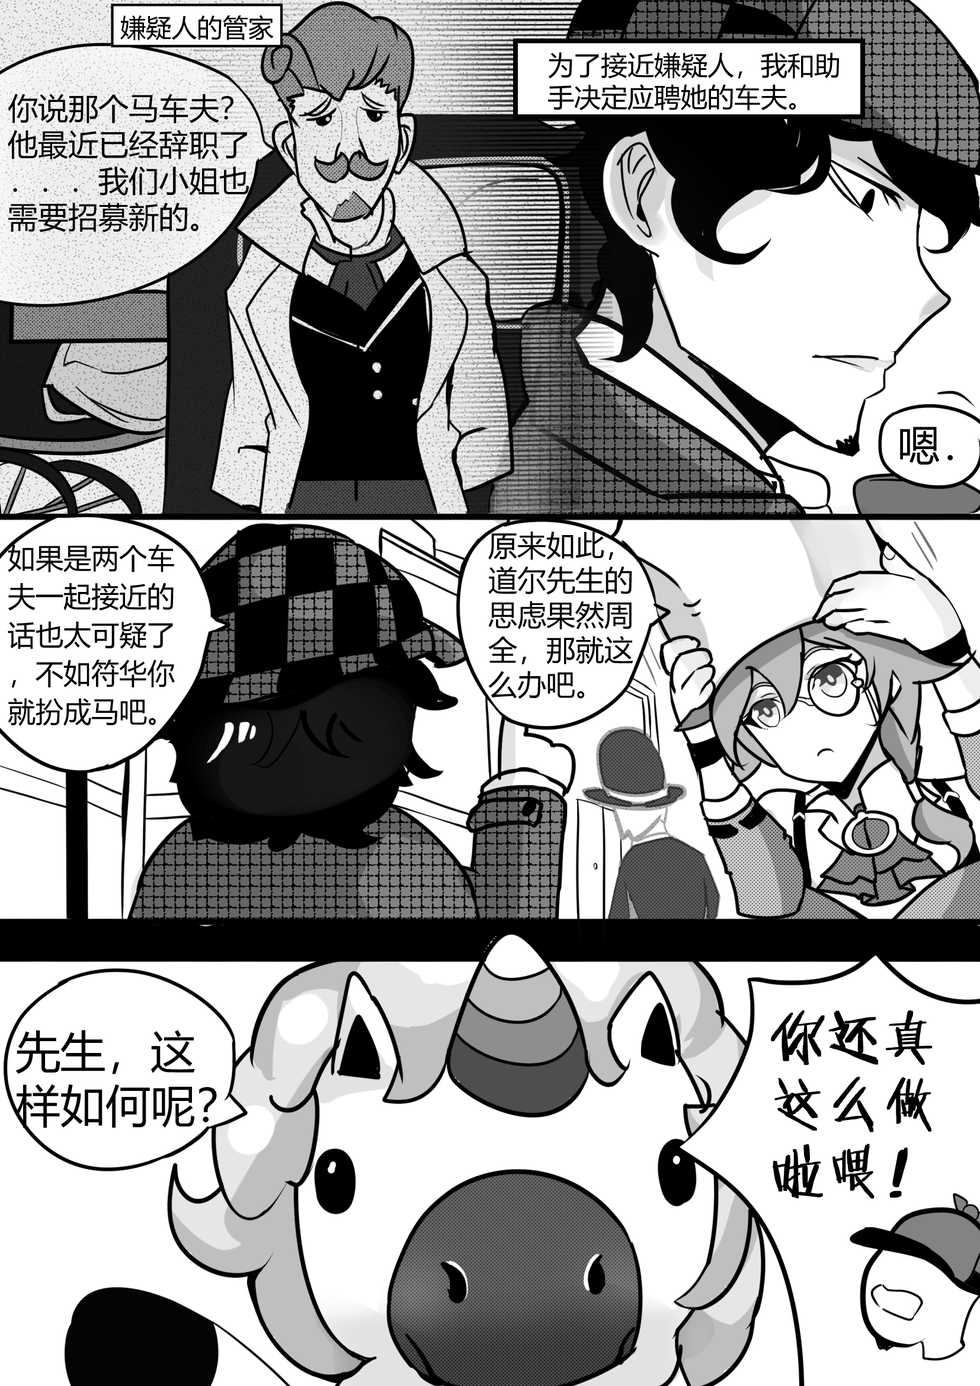 (White Bank) Collapse 1-6 (Honkai Impact 3rd) [Chinese] - Page 10